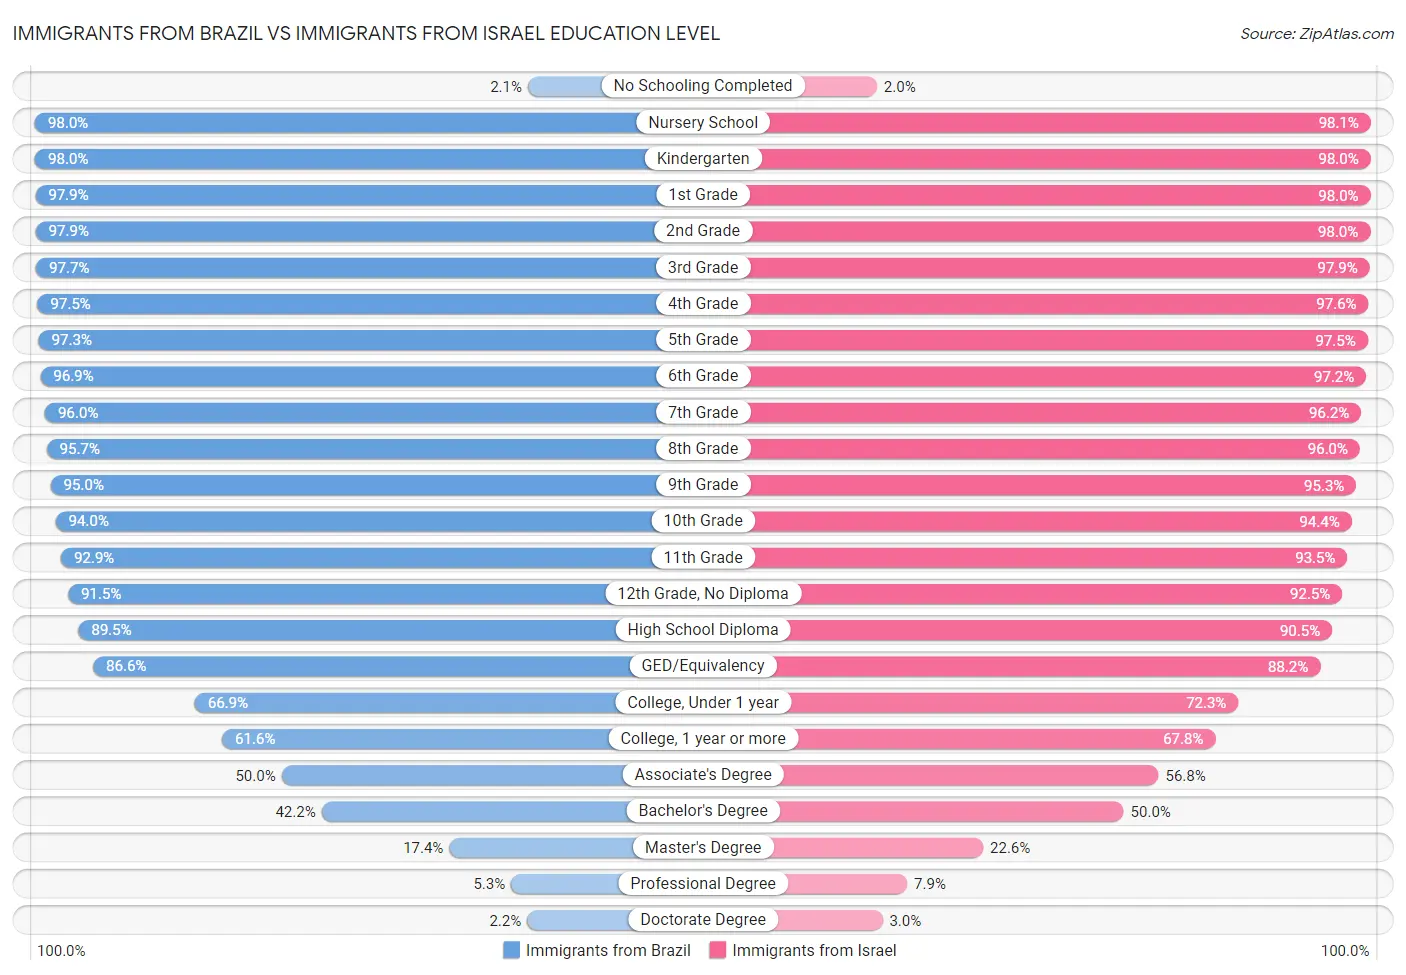 Immigrants from Brazil vs Immigrants from Israel Education Level